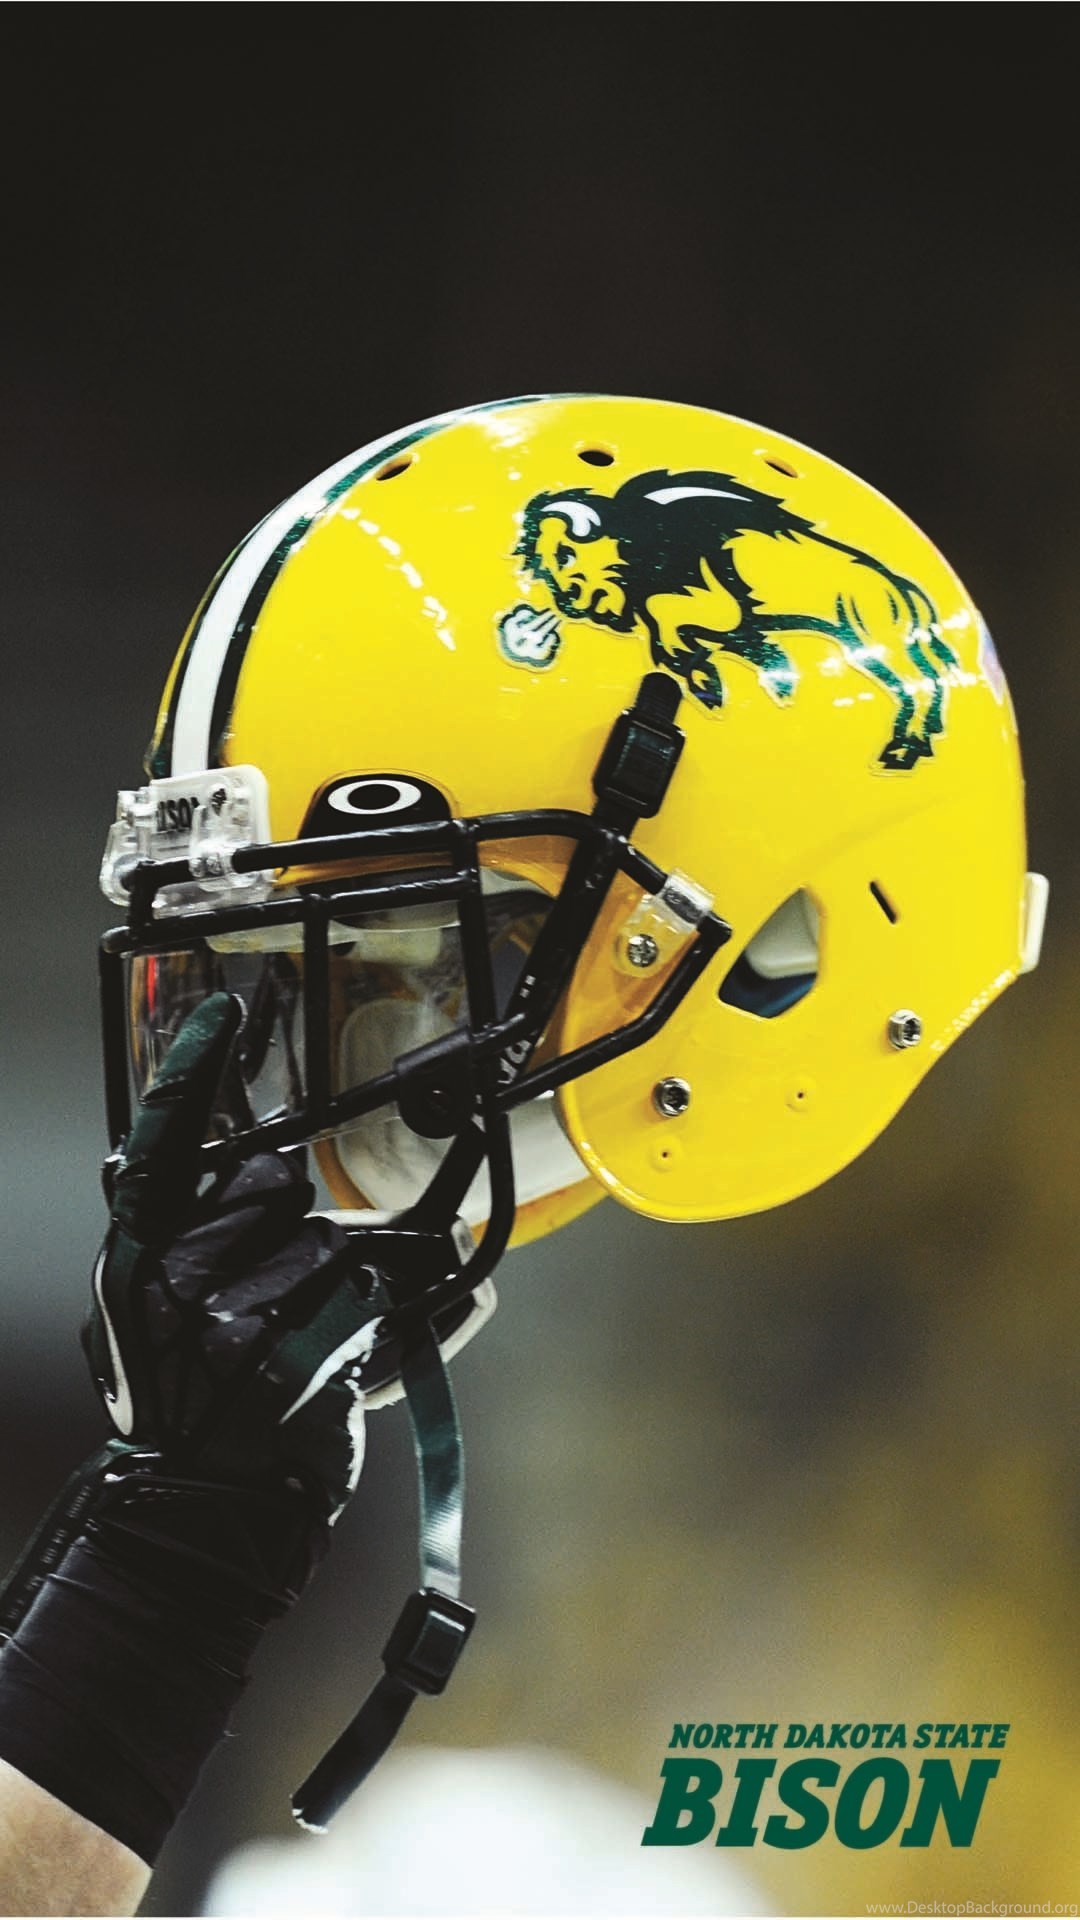 1080x1920 Ndsu bison wallpaper images reverse search